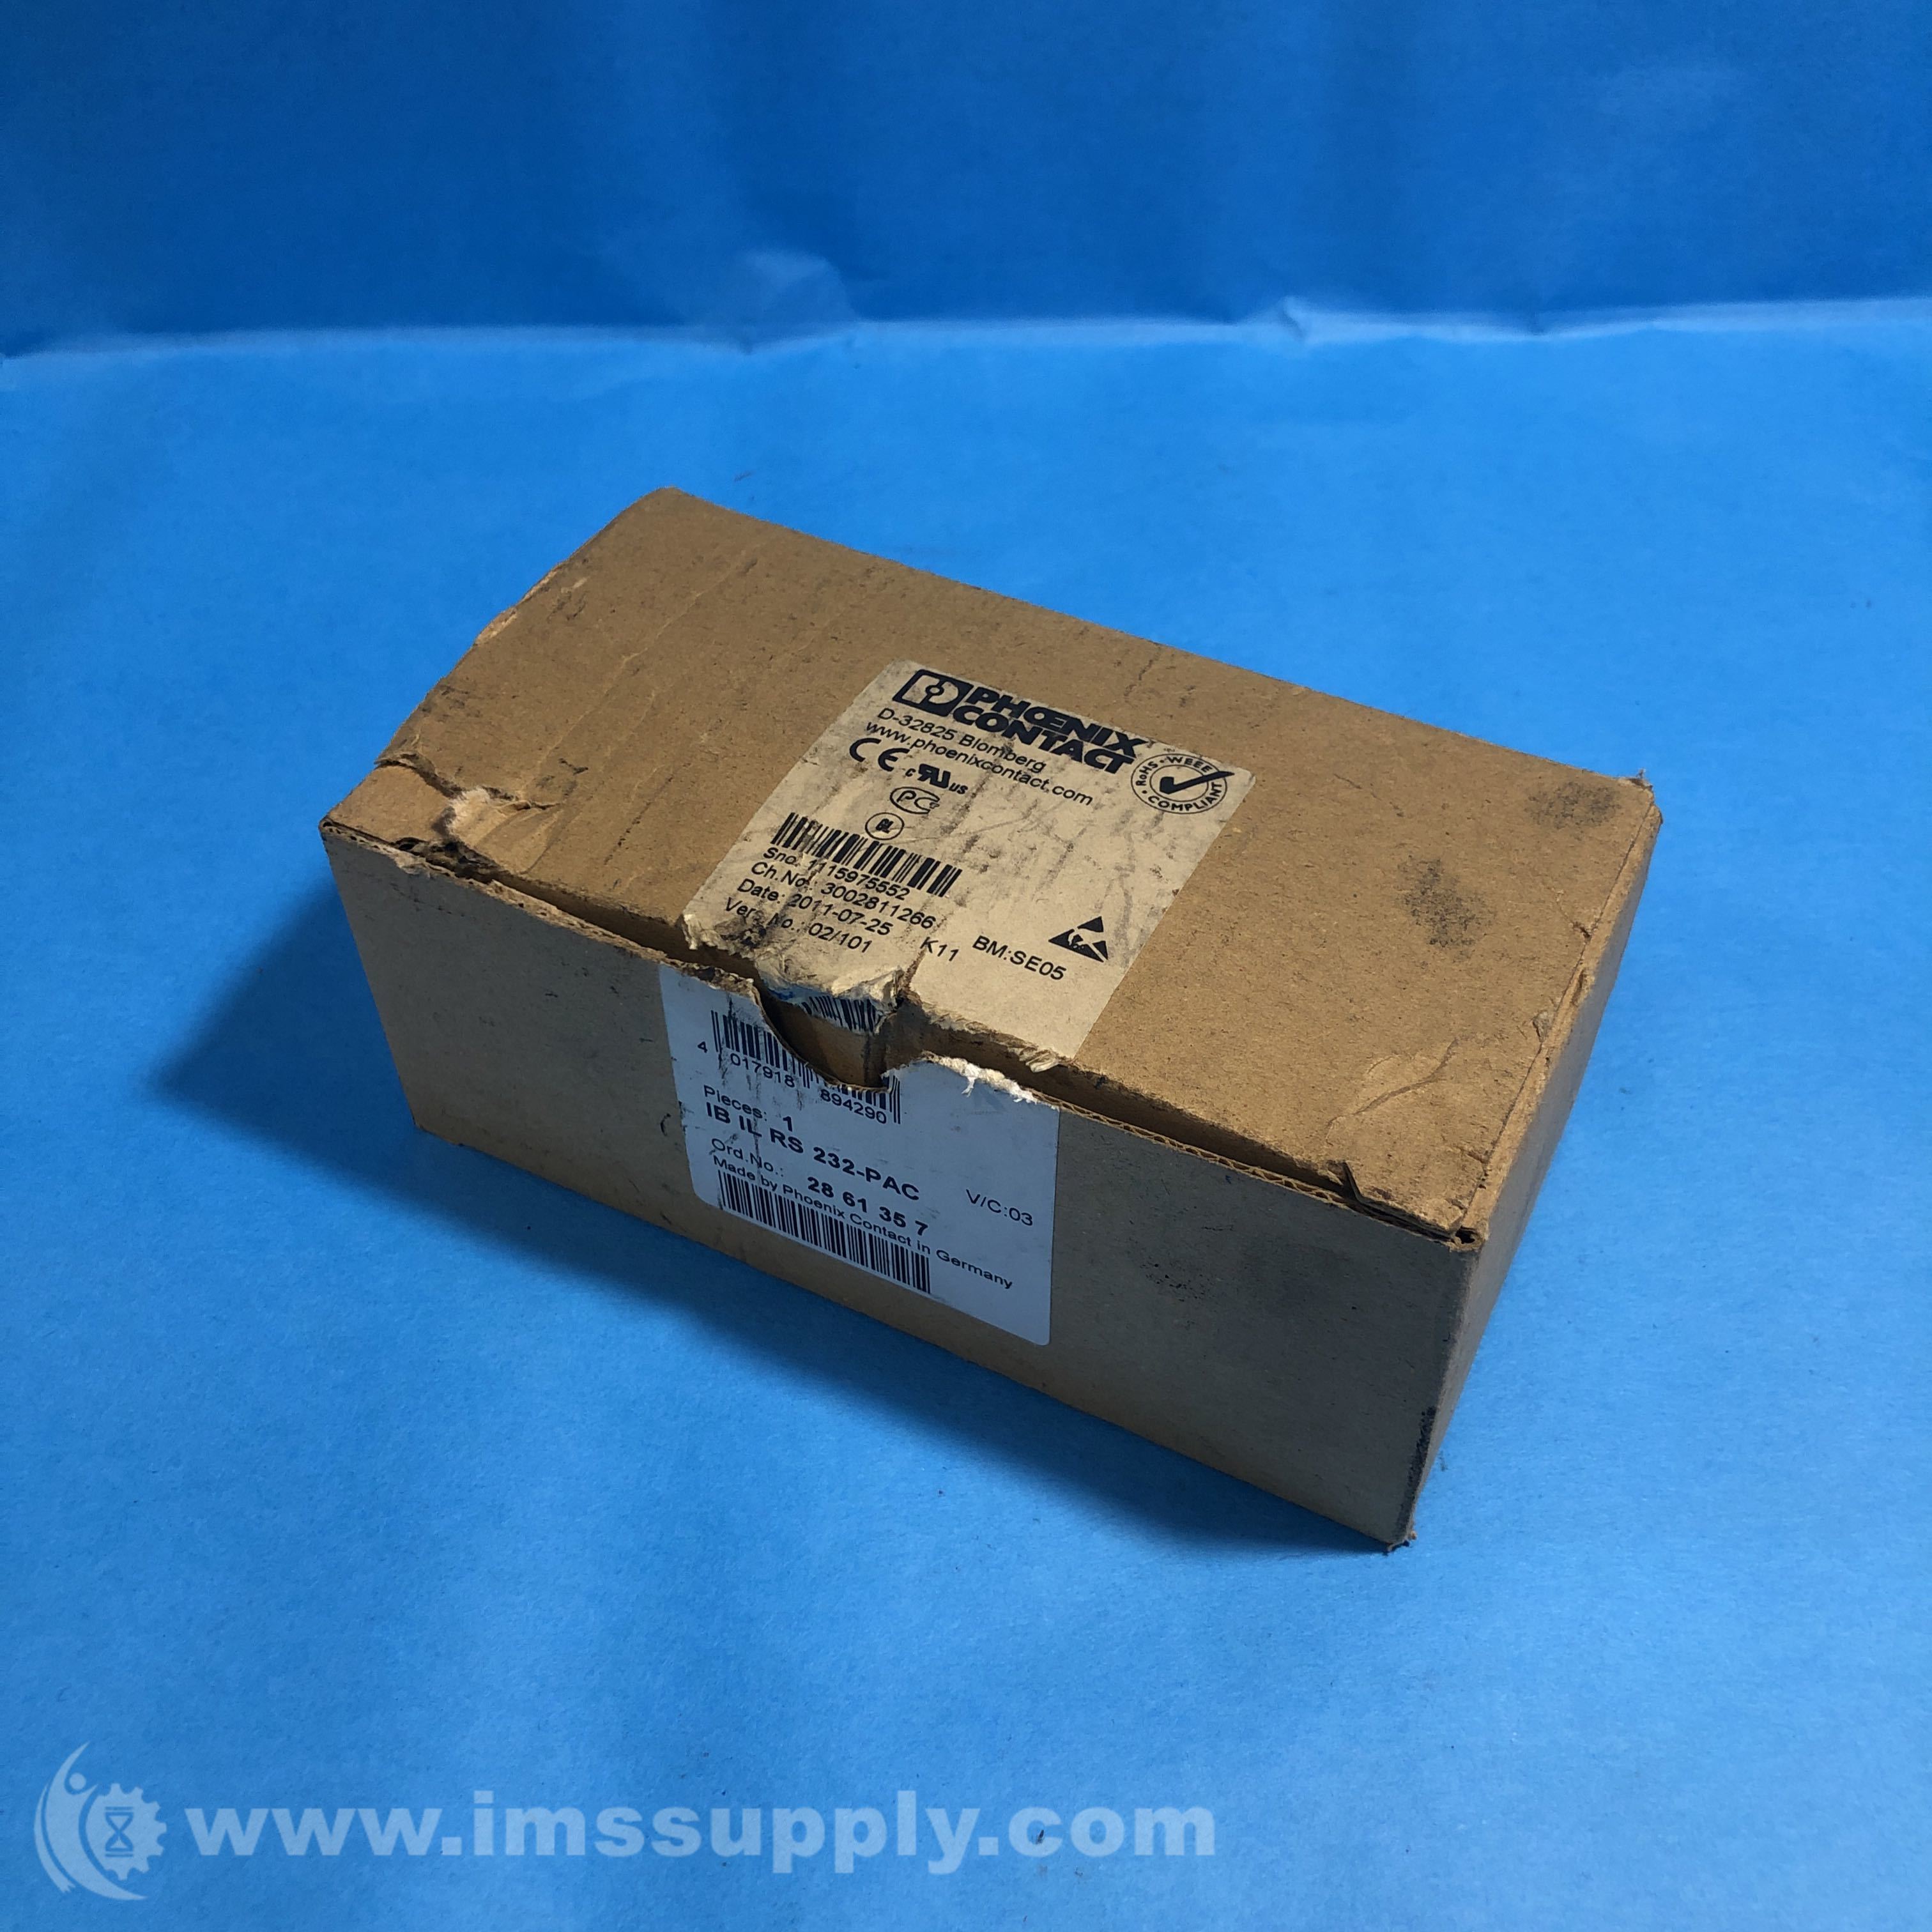 Phoenix Contact IB IL RS 232-PAC Expansion Module - IMS Supply